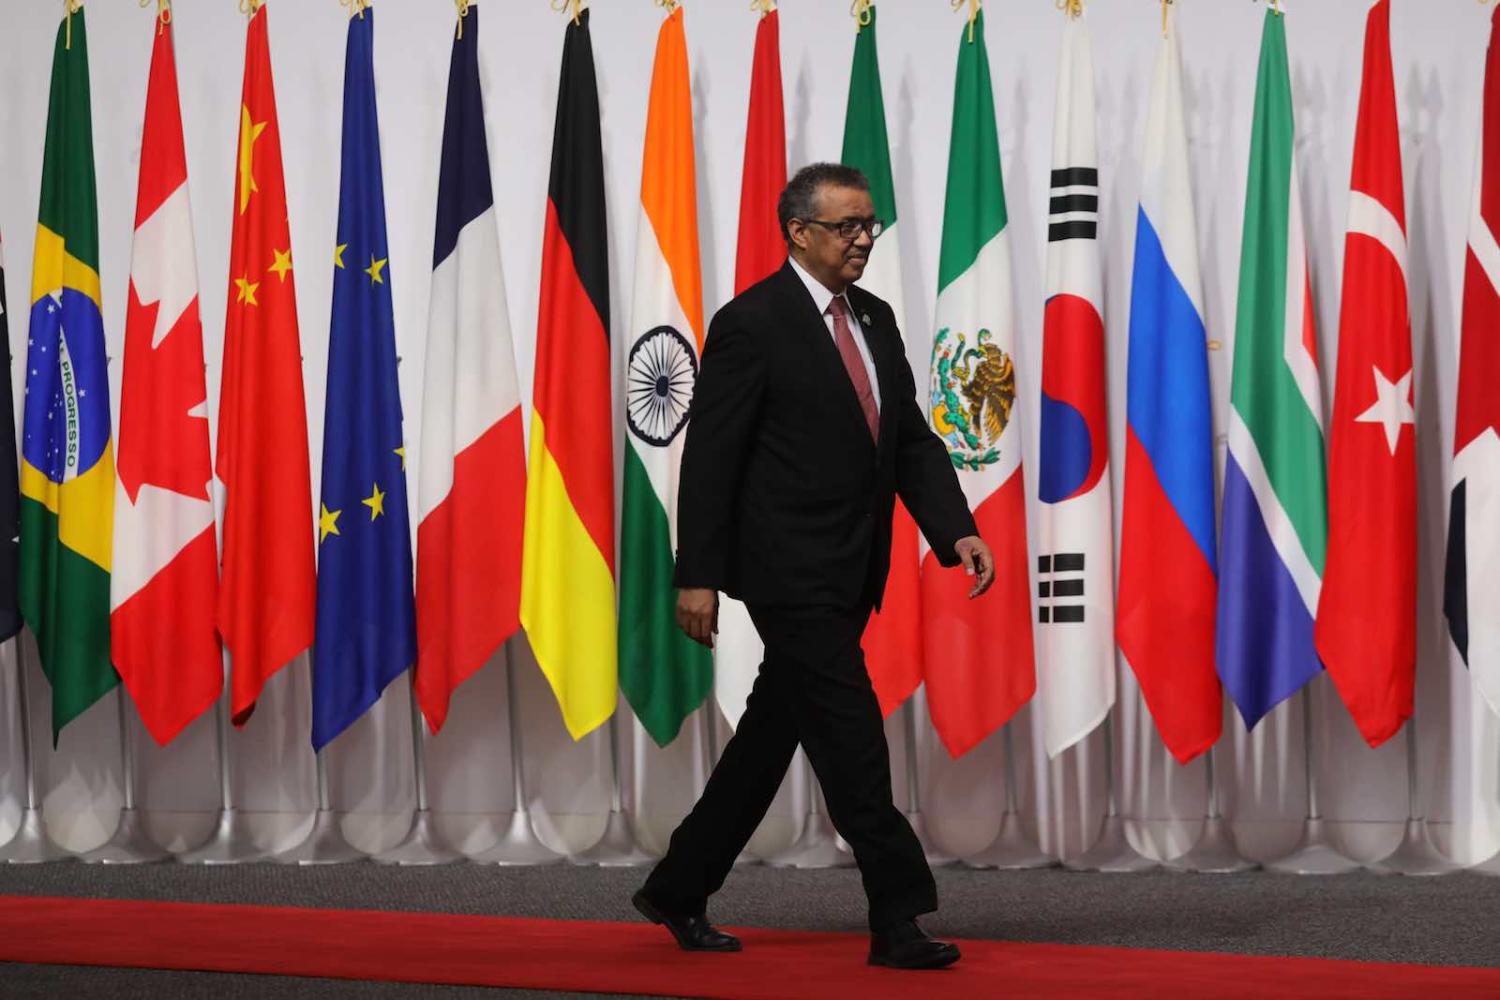 World Health Organization Director-General Tedros Adhanom at the G20 Summit in Osaka, Japan, June 2019 (Ludovic Marin/AFP via Getty Images)